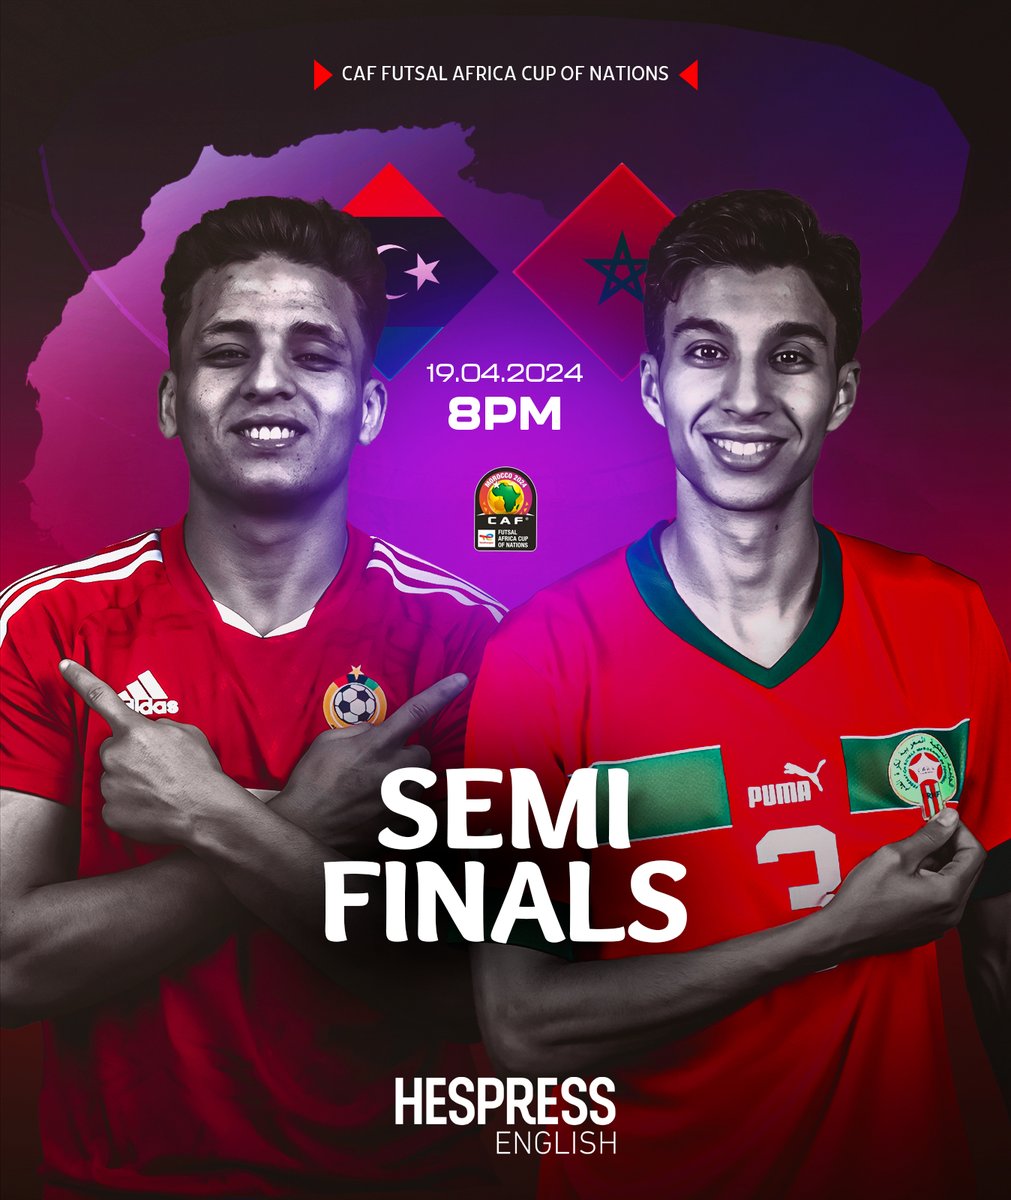 Morocco's national futsal team is ready to take on Libya in the African Cup semifinals tonight at 8:00 p.m. at Complex Moulay Abdellah Sports Hall in Rabat.

#Morocco #Libya #Futsal #Rabat #FutsalAfricaCup
#HespressEng